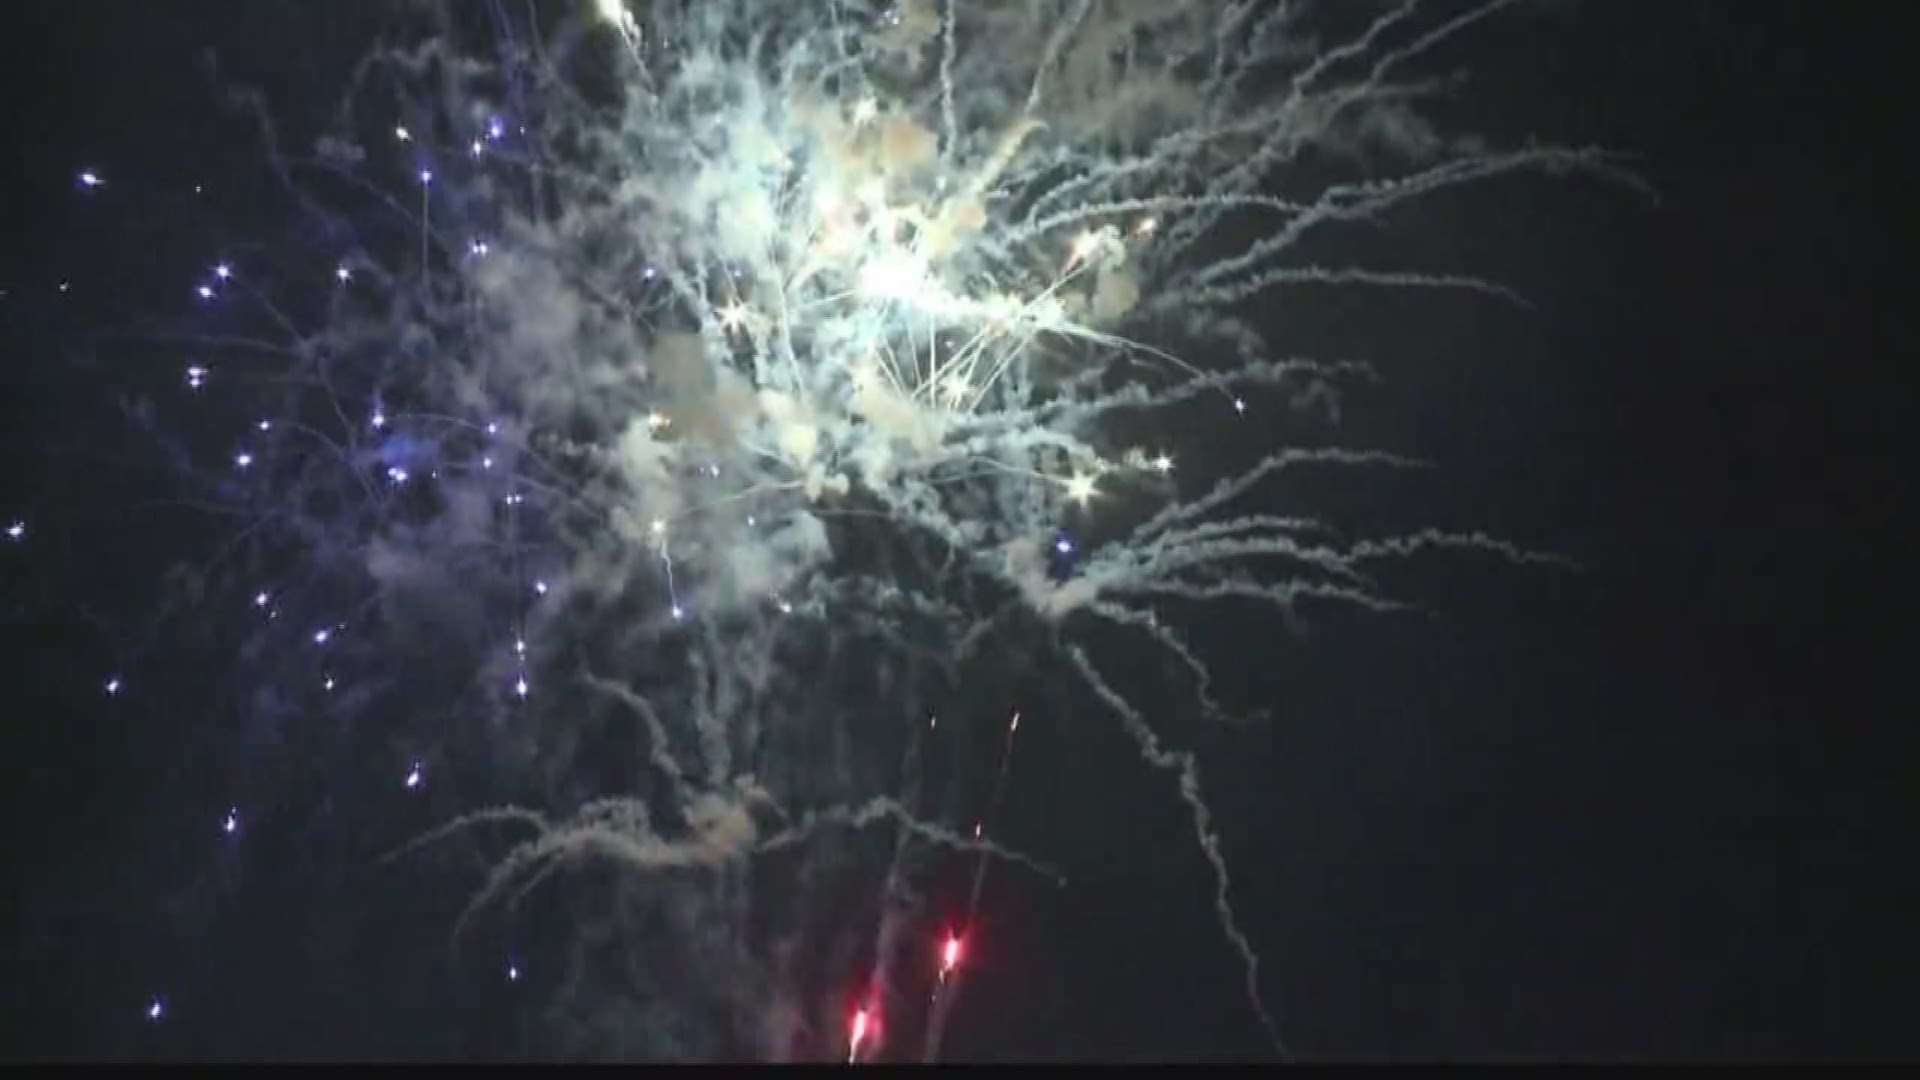 KREM 2's Amanda Roley checks in on how firework shows are put together and executed for the Fourth of July weekend